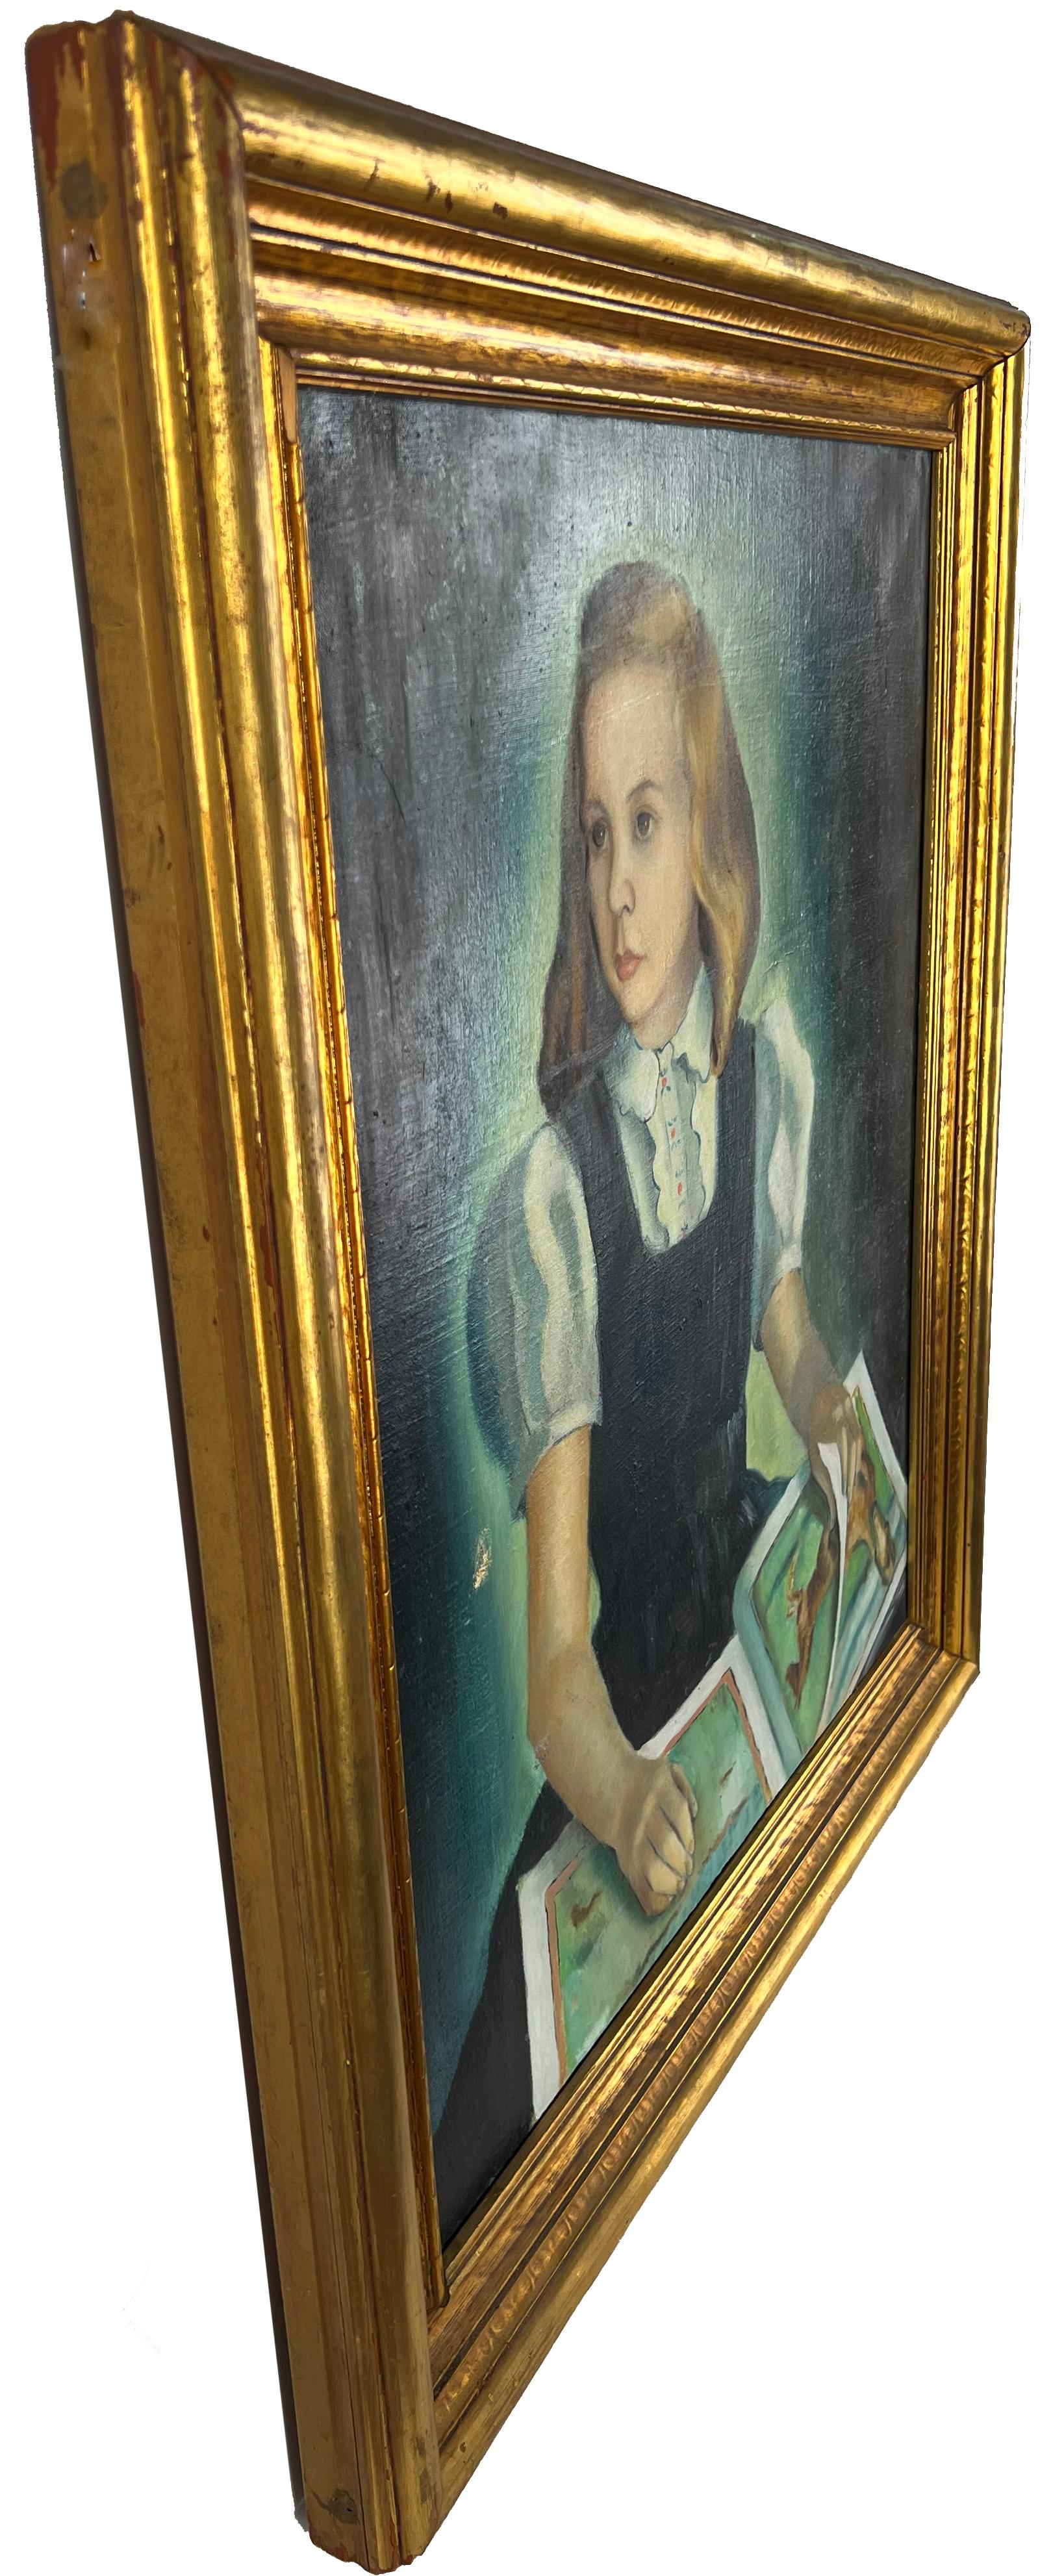 Young Girl with Horse Illustrations Original Oil on Linen by John Turner 1941 For Sale 4